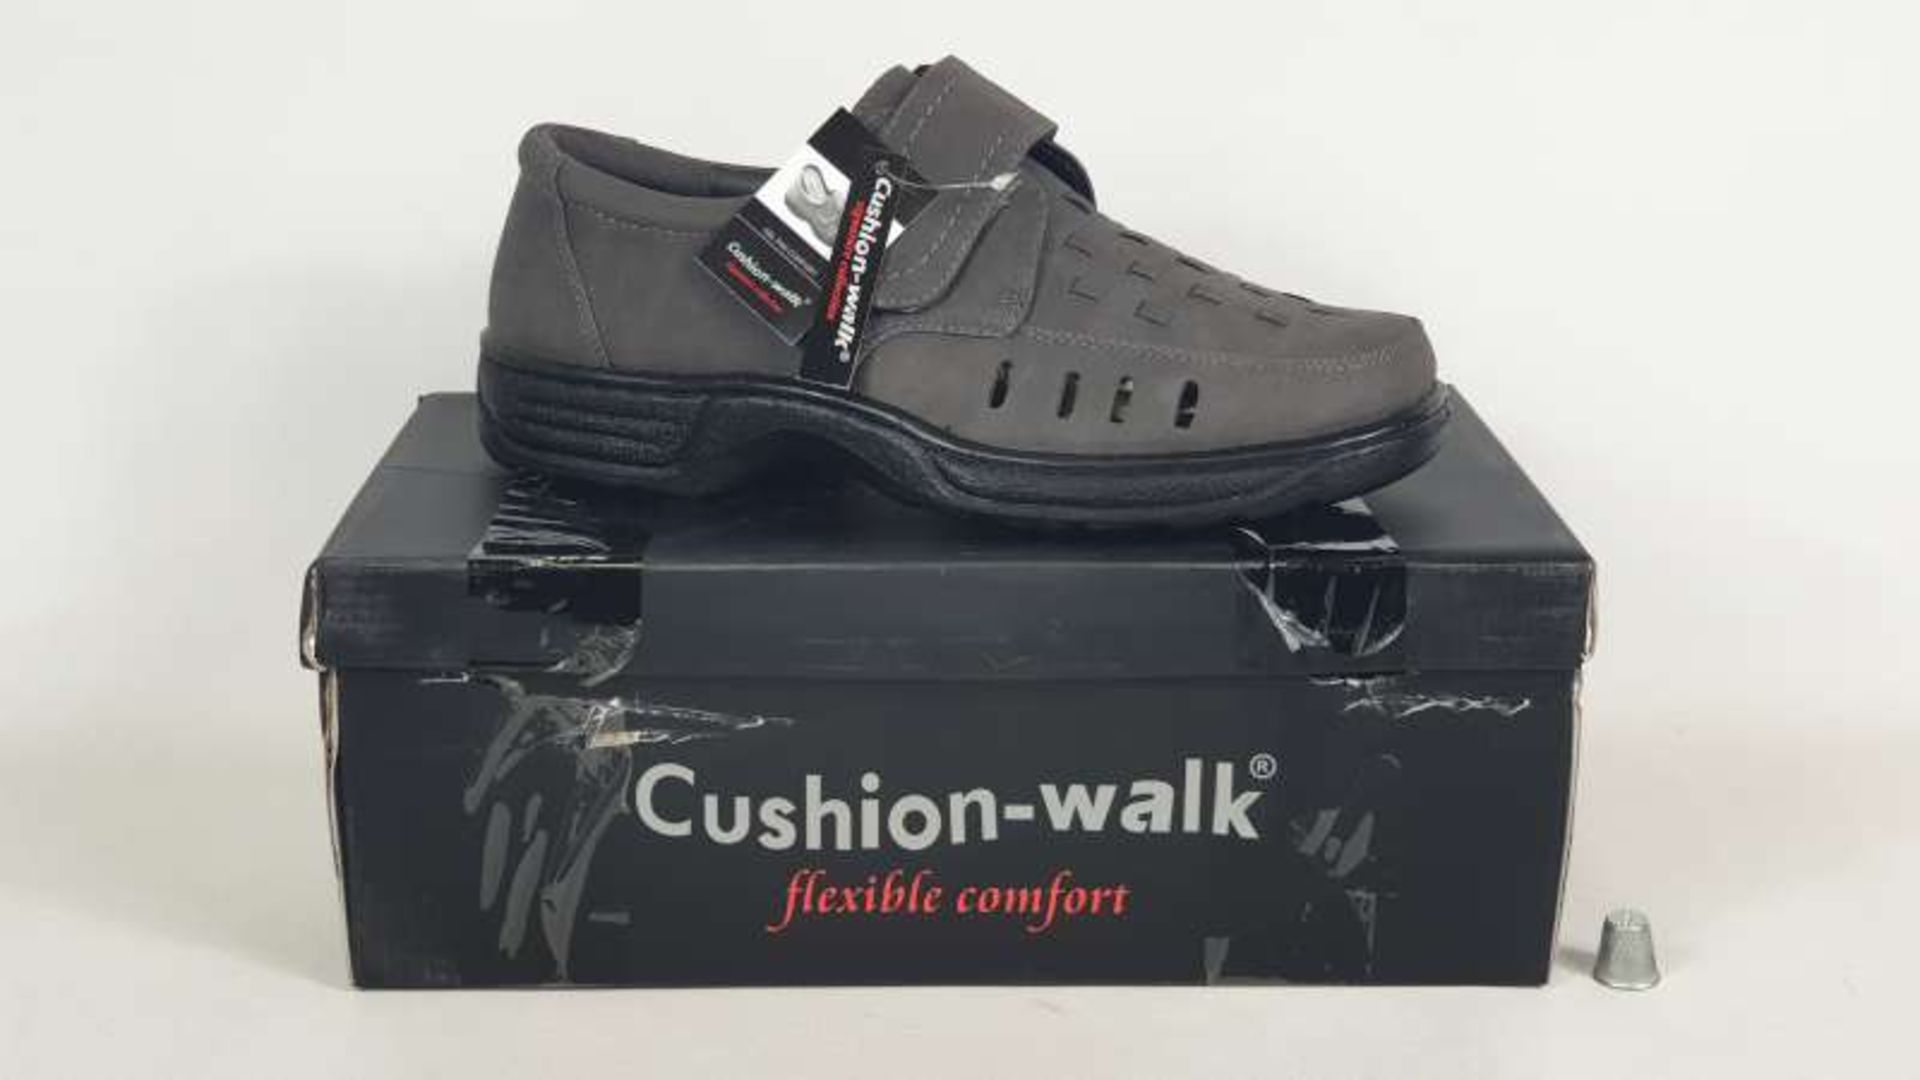 18 X PAIRS OF CUSHION WALK FOOTWEAR SIZE 8 IN 3 BOXES